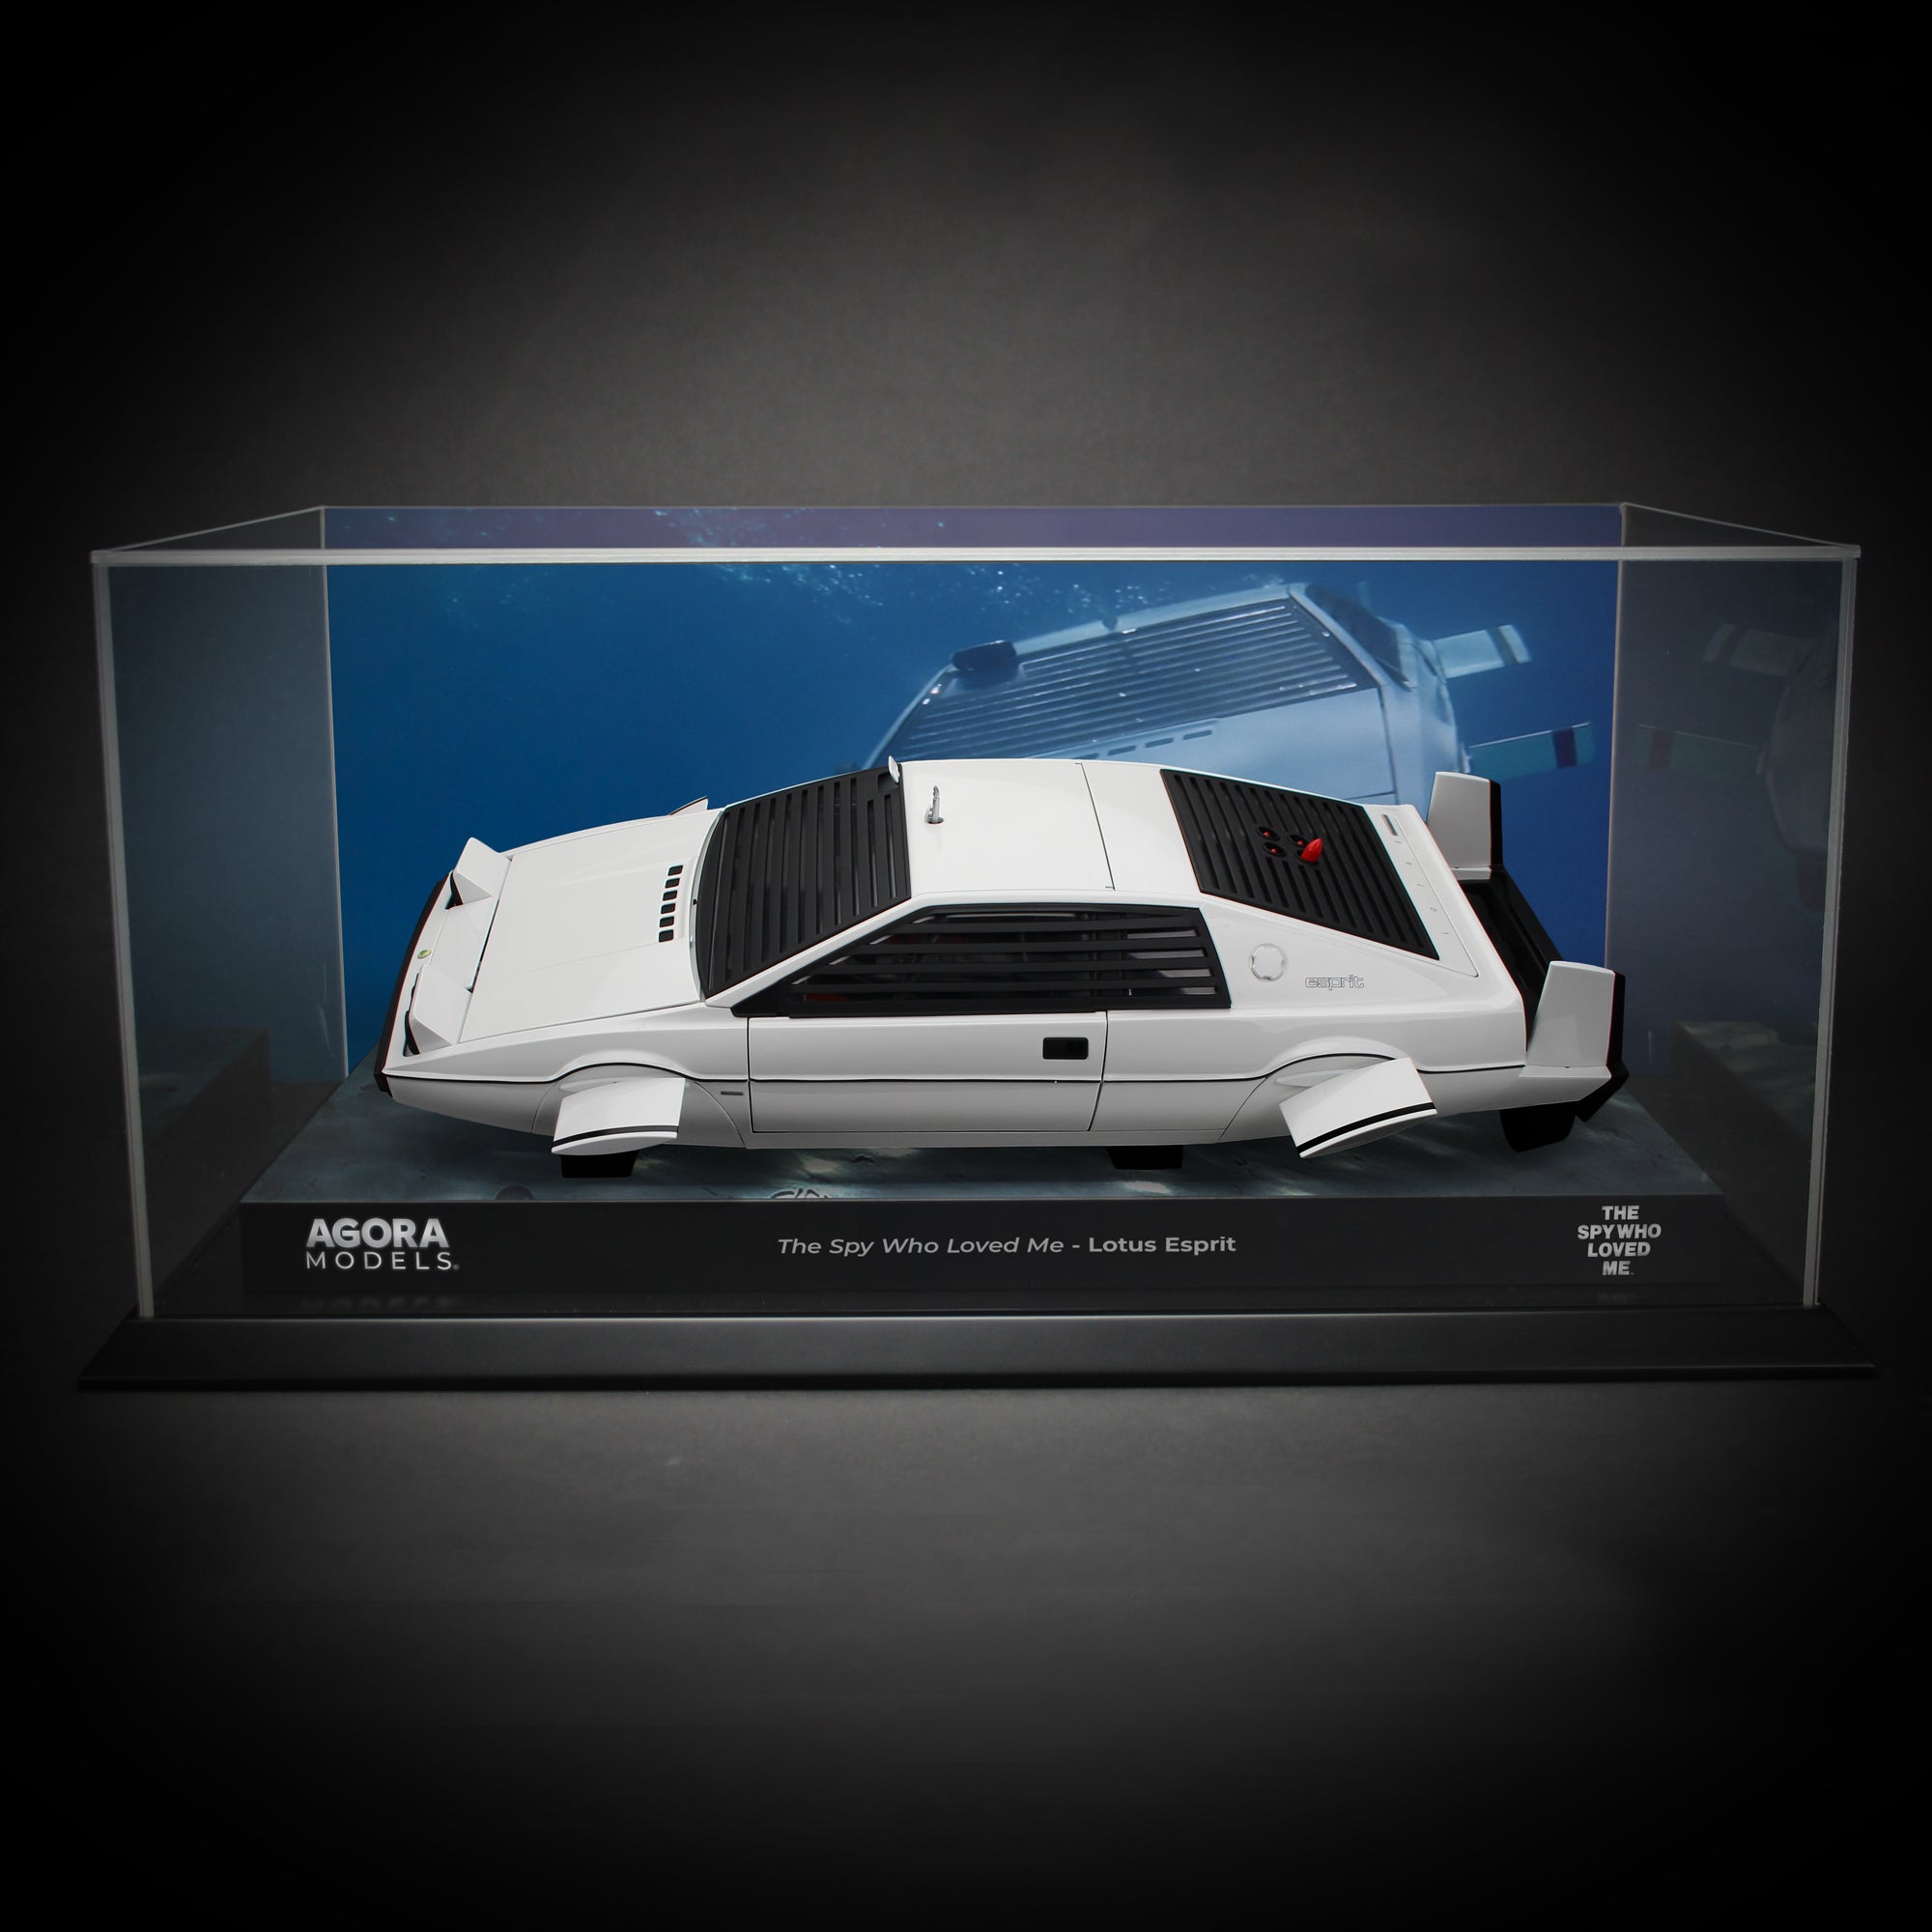 James Bond The Spy Who Loved Me Lotus Esprit Model Car Kit - Collector's Numbered Edition Subscription - By Agora Models